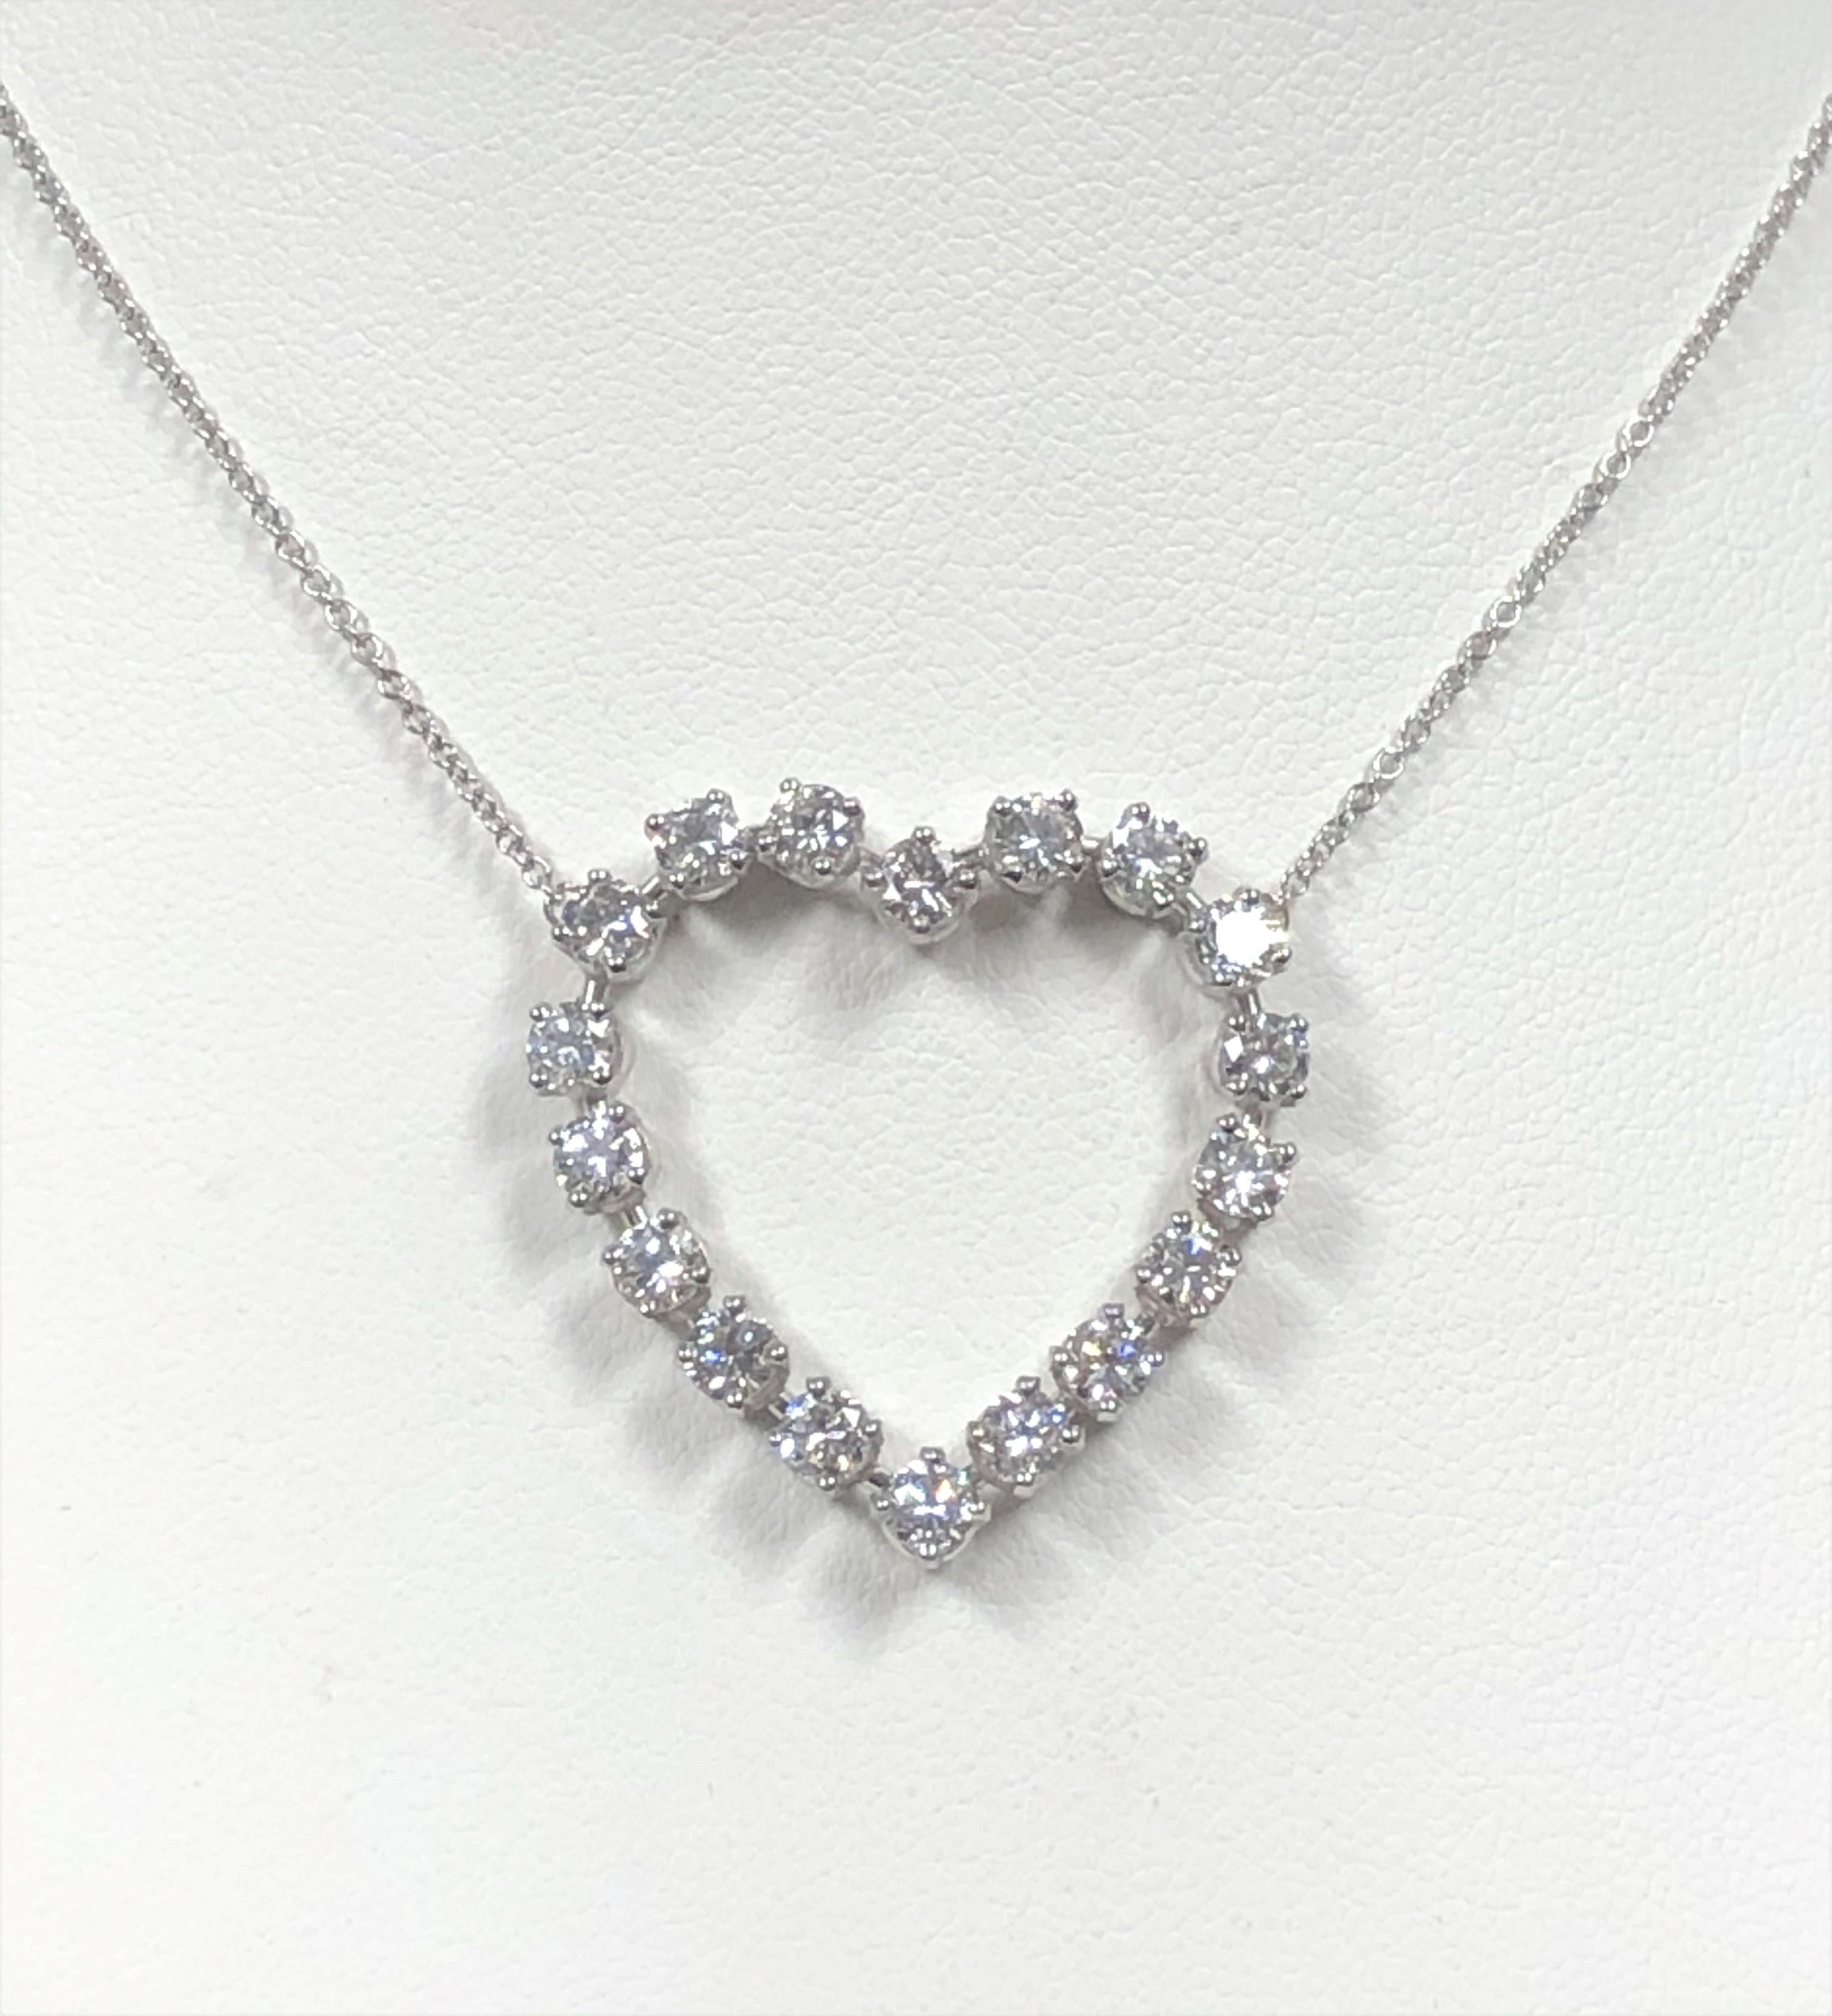 Circa 1990s Tiffany & Company Platinum Open Heart Necklace, the heart measuring 1 1/8 X 1 1/8 inches and is set with Fine White Round Brilliant cut Diamonds totaling 2 Carats. Suspended from a 16 inch Platinum link chain, both the Heart and chain